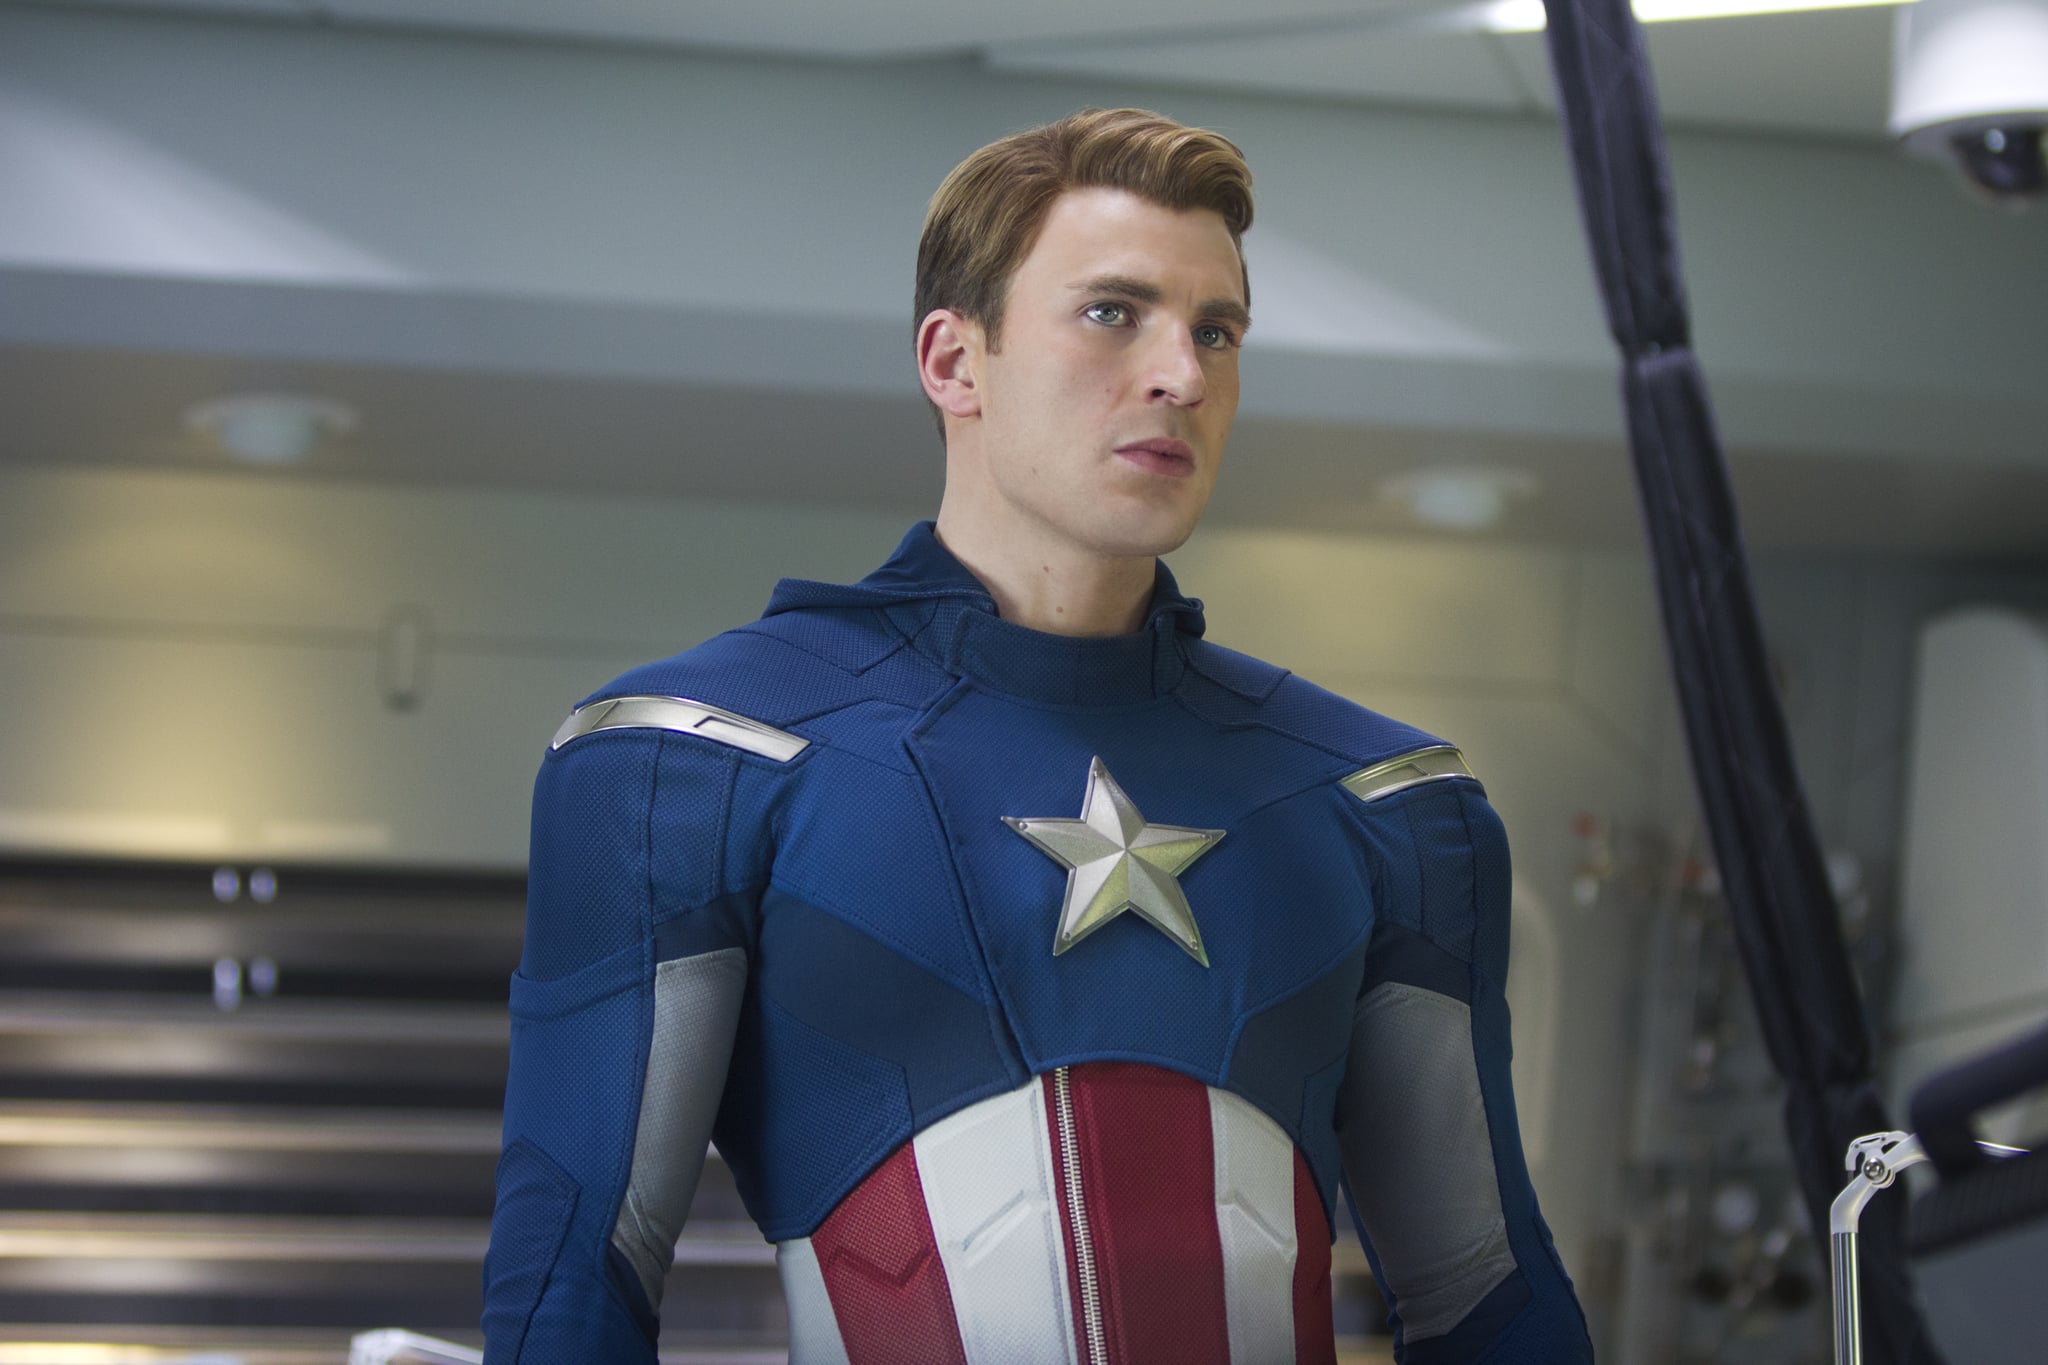 chris evans had initially turned down the role of captain america